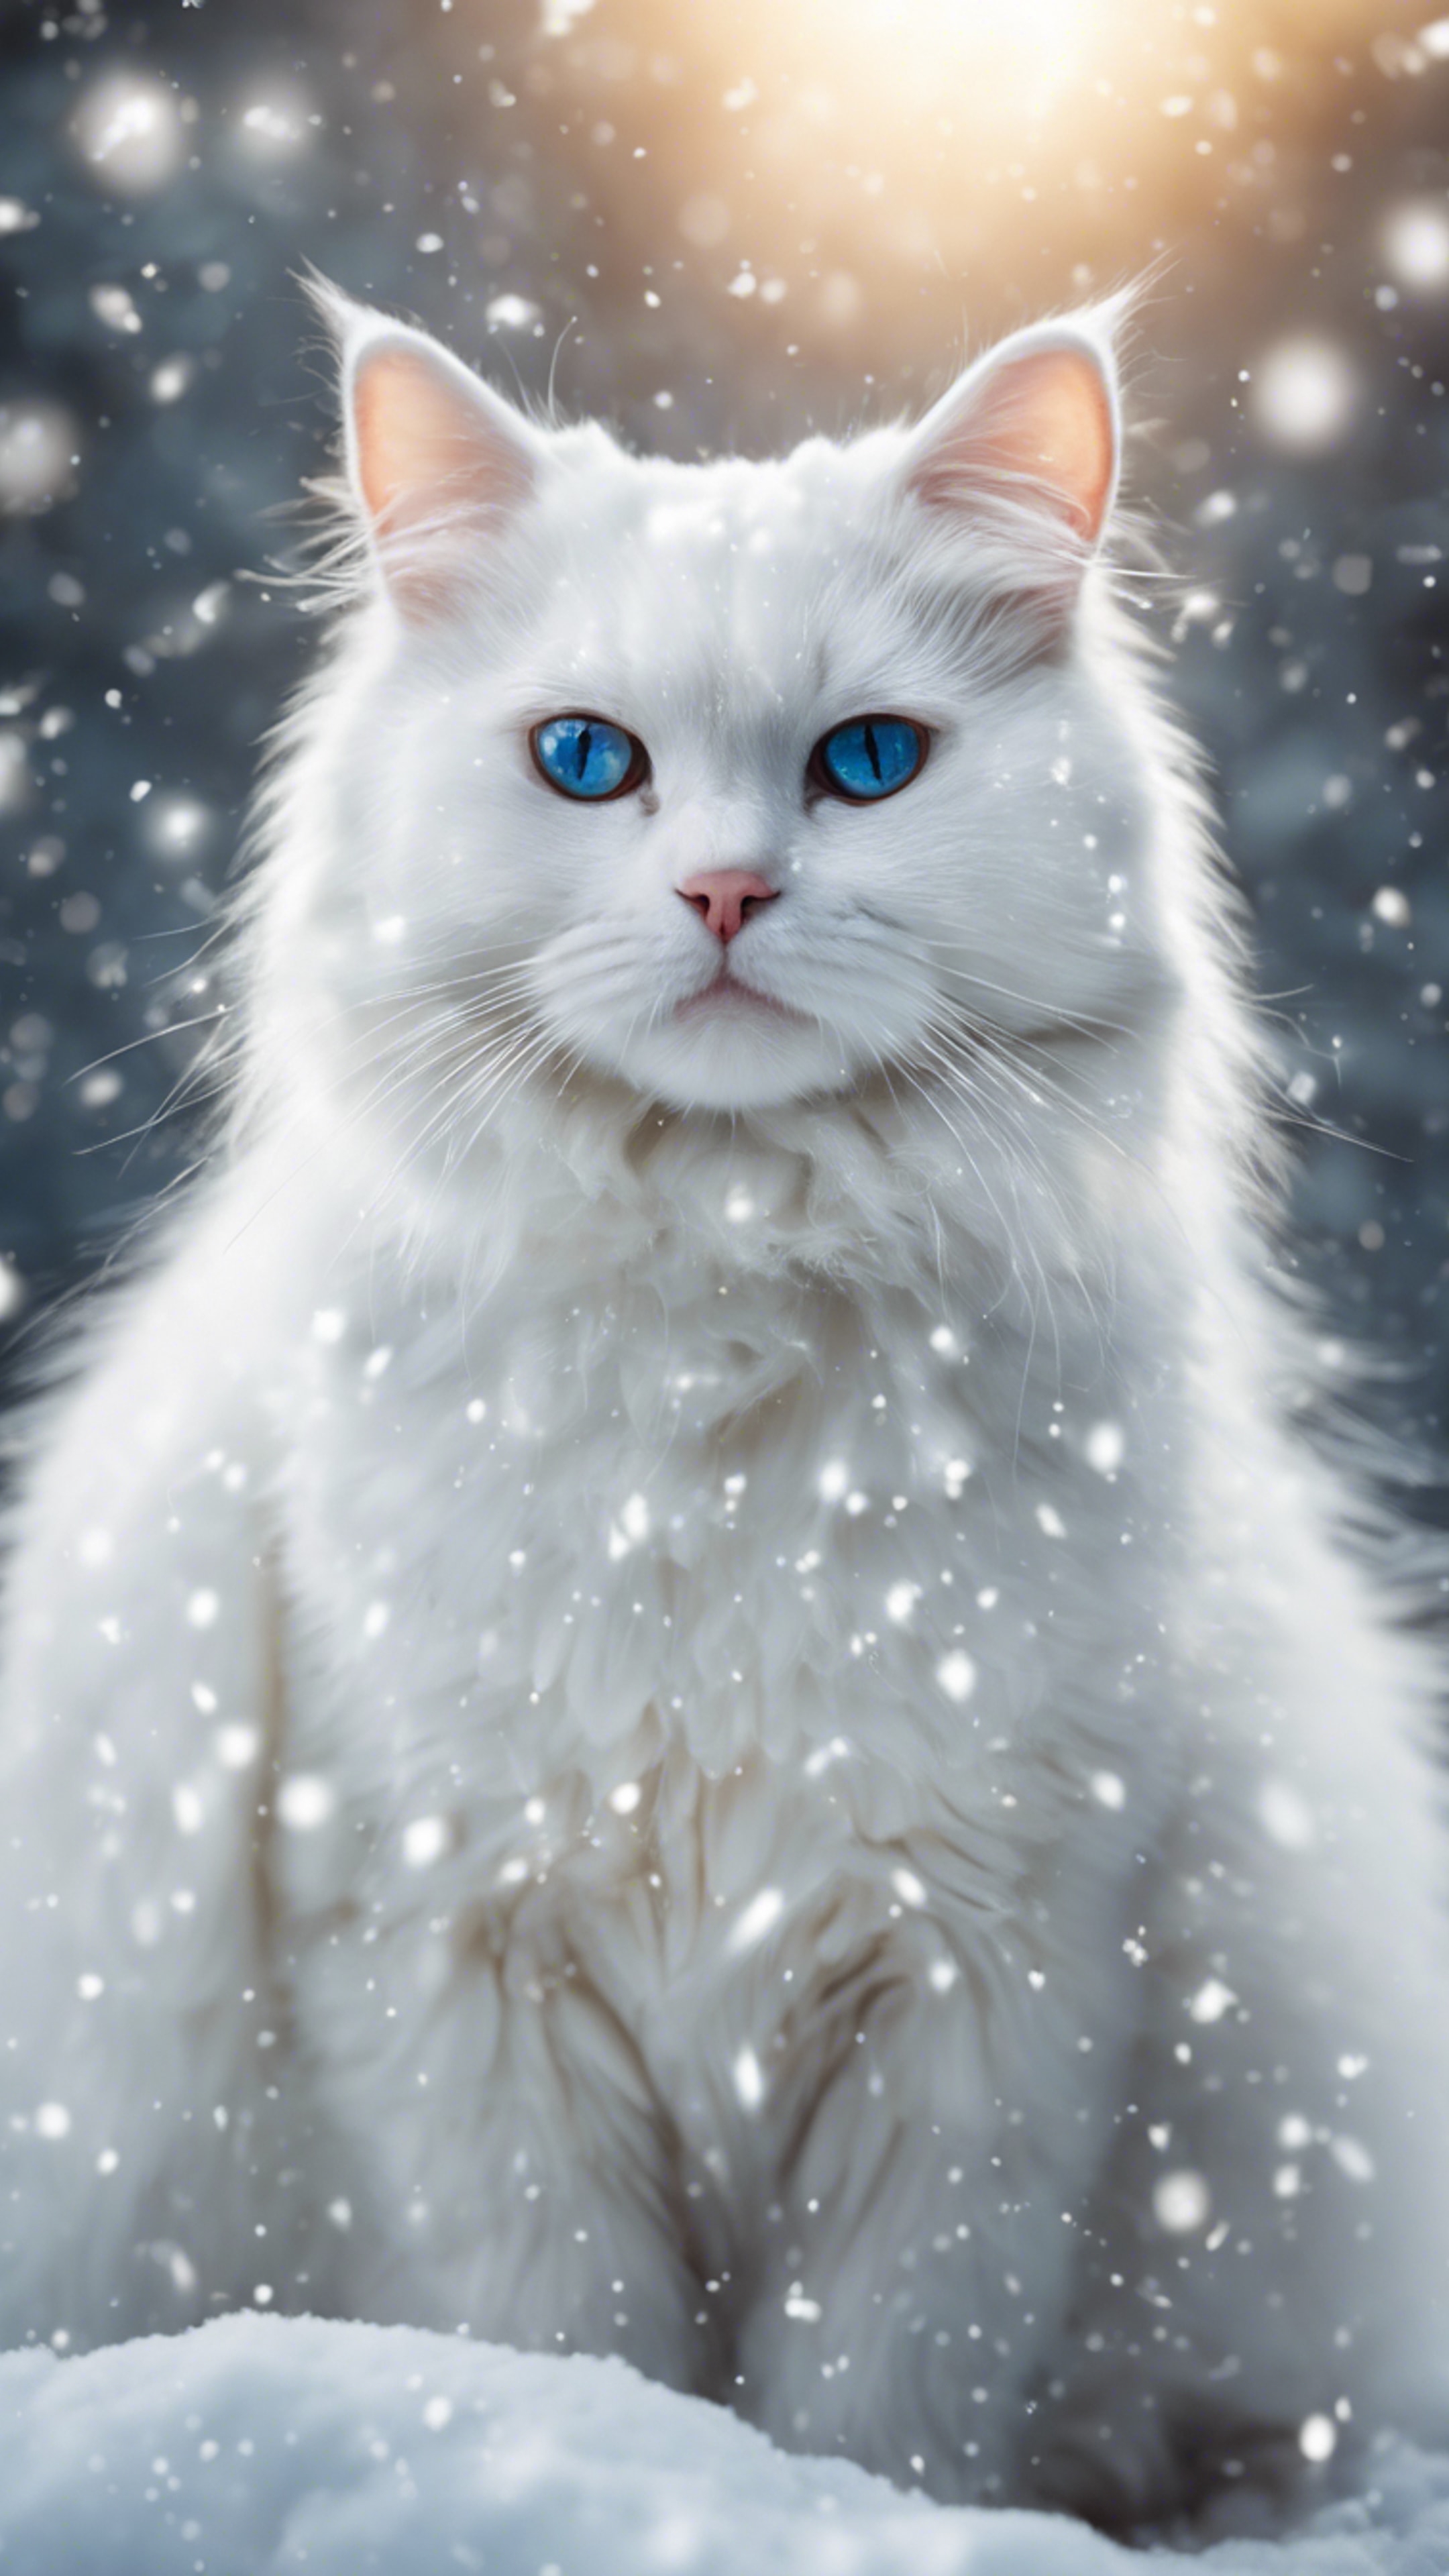 A fluffy white cat in the winter, amidst falling snowflakes. טפט[a246cb8c0cd2485b96c3]